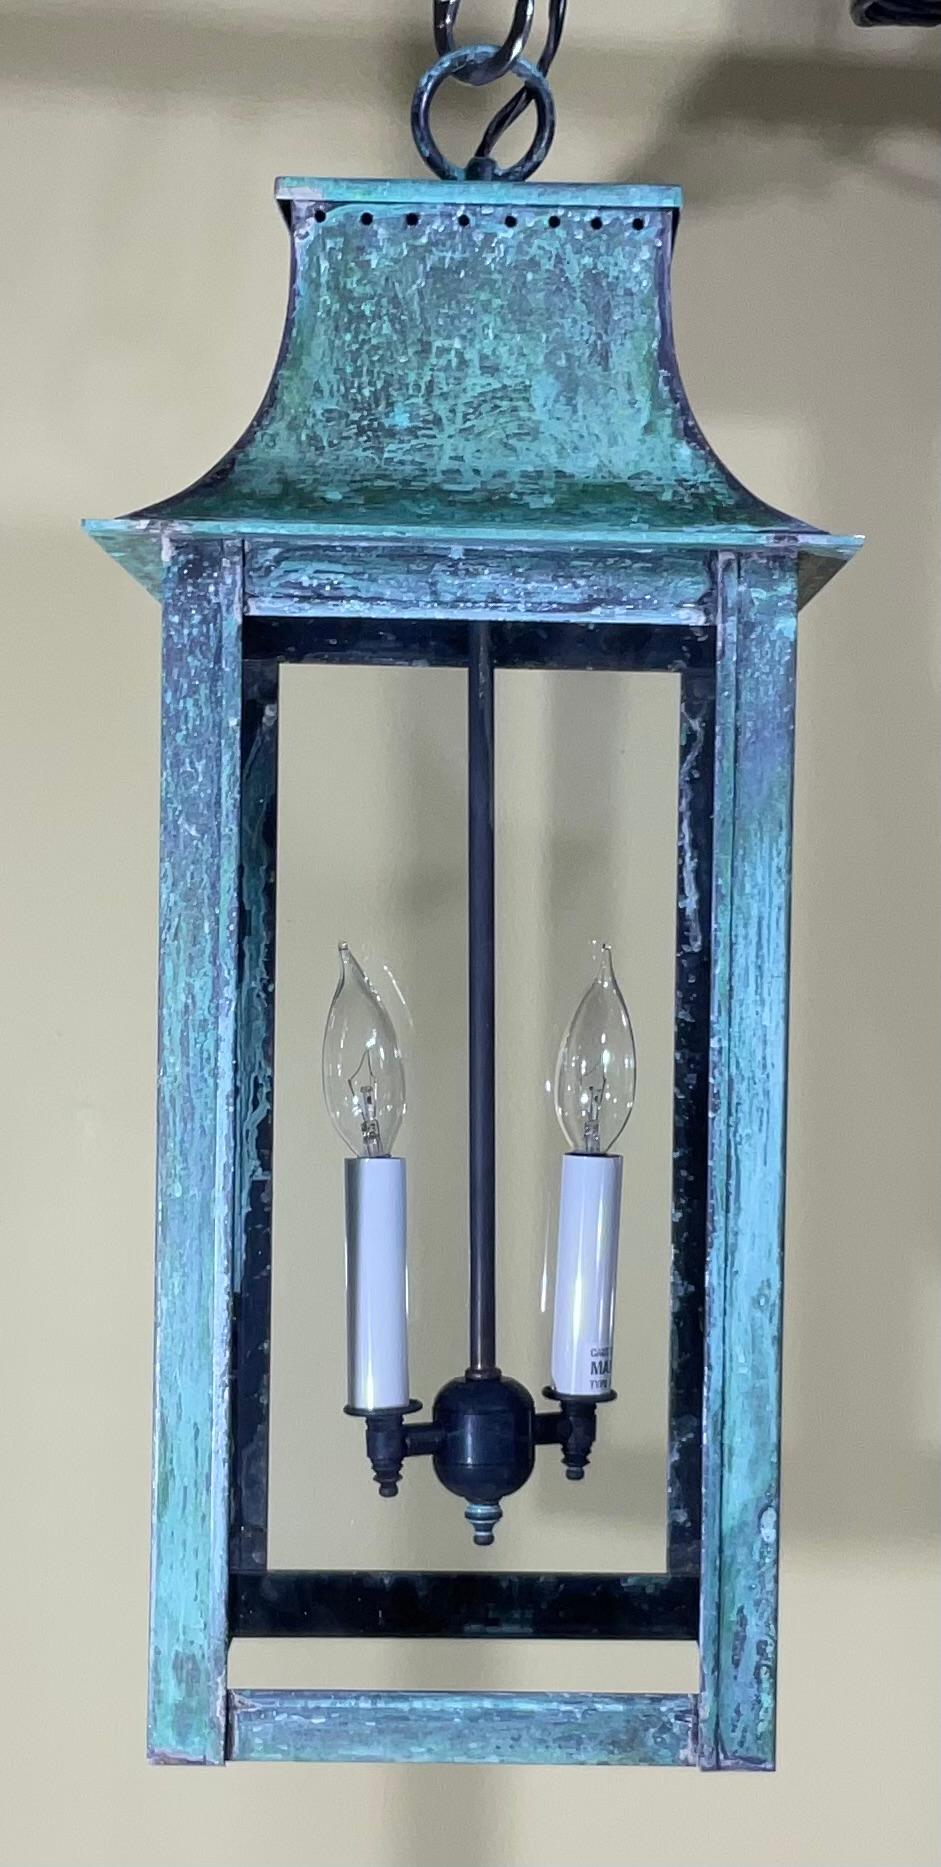 Quality handmade solid brass lantern with two 60 watt lights.
Electrified and ready to light. Beautiful oxidization patina.
Made in the US , UL approved 
Could be used in wet location and indoor.